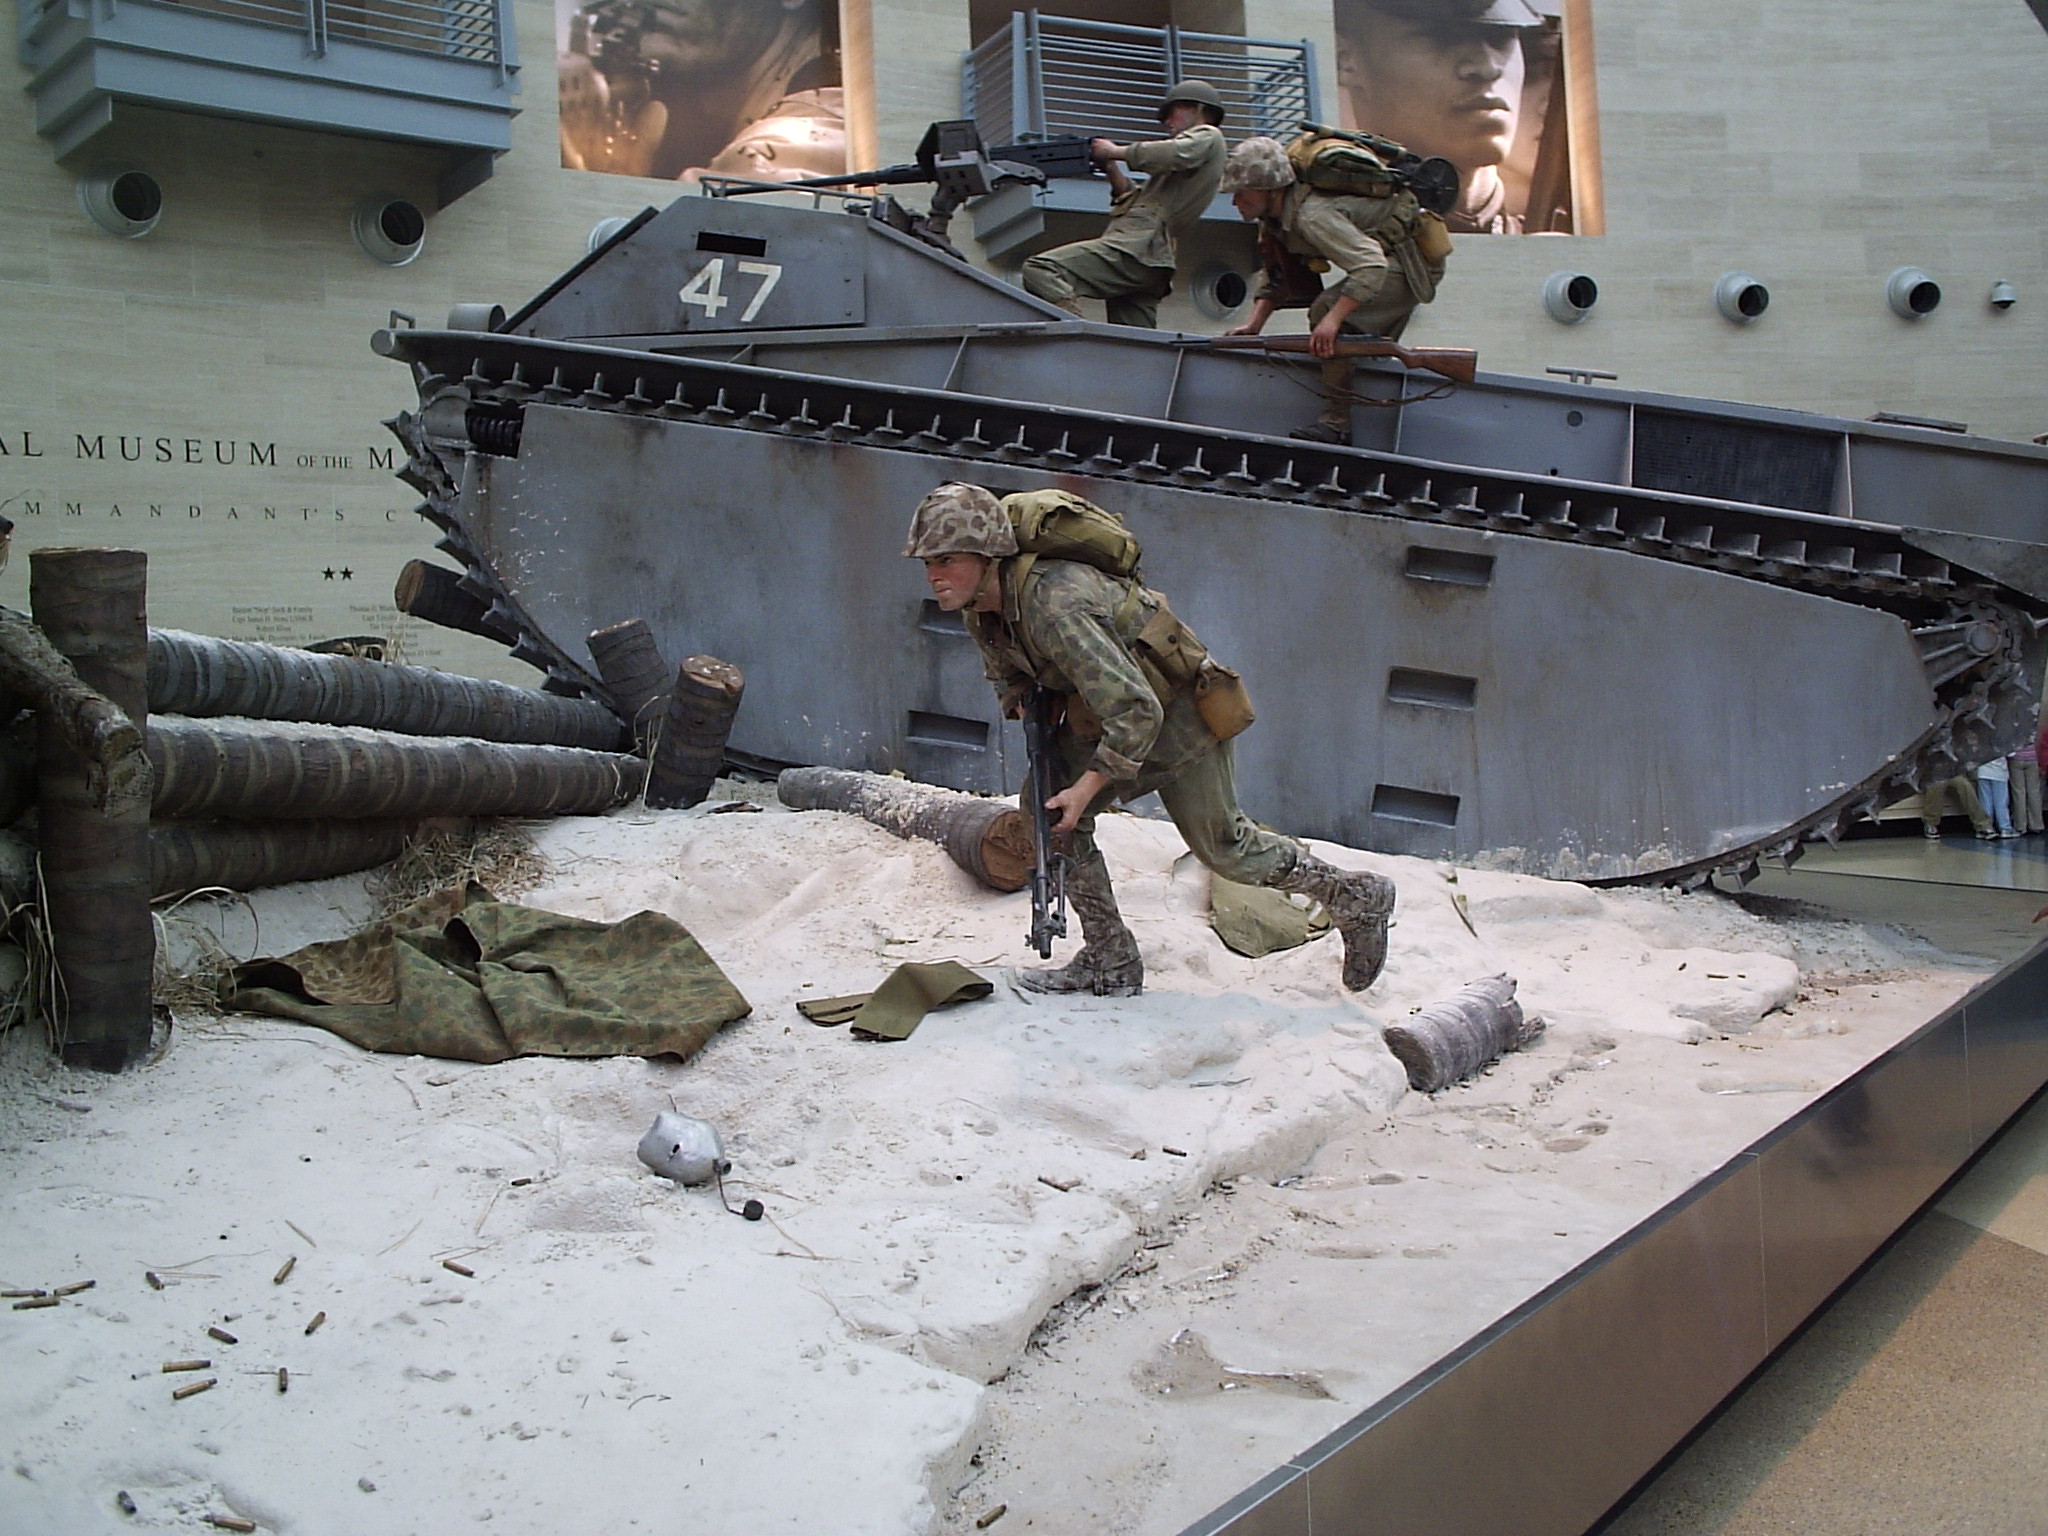 Tarawa display in the Leatherneck Gallery at the National Museum of the Marine Corps, Quantico, Virginia, United States, 15 Jan 2007, photo 1 of 2